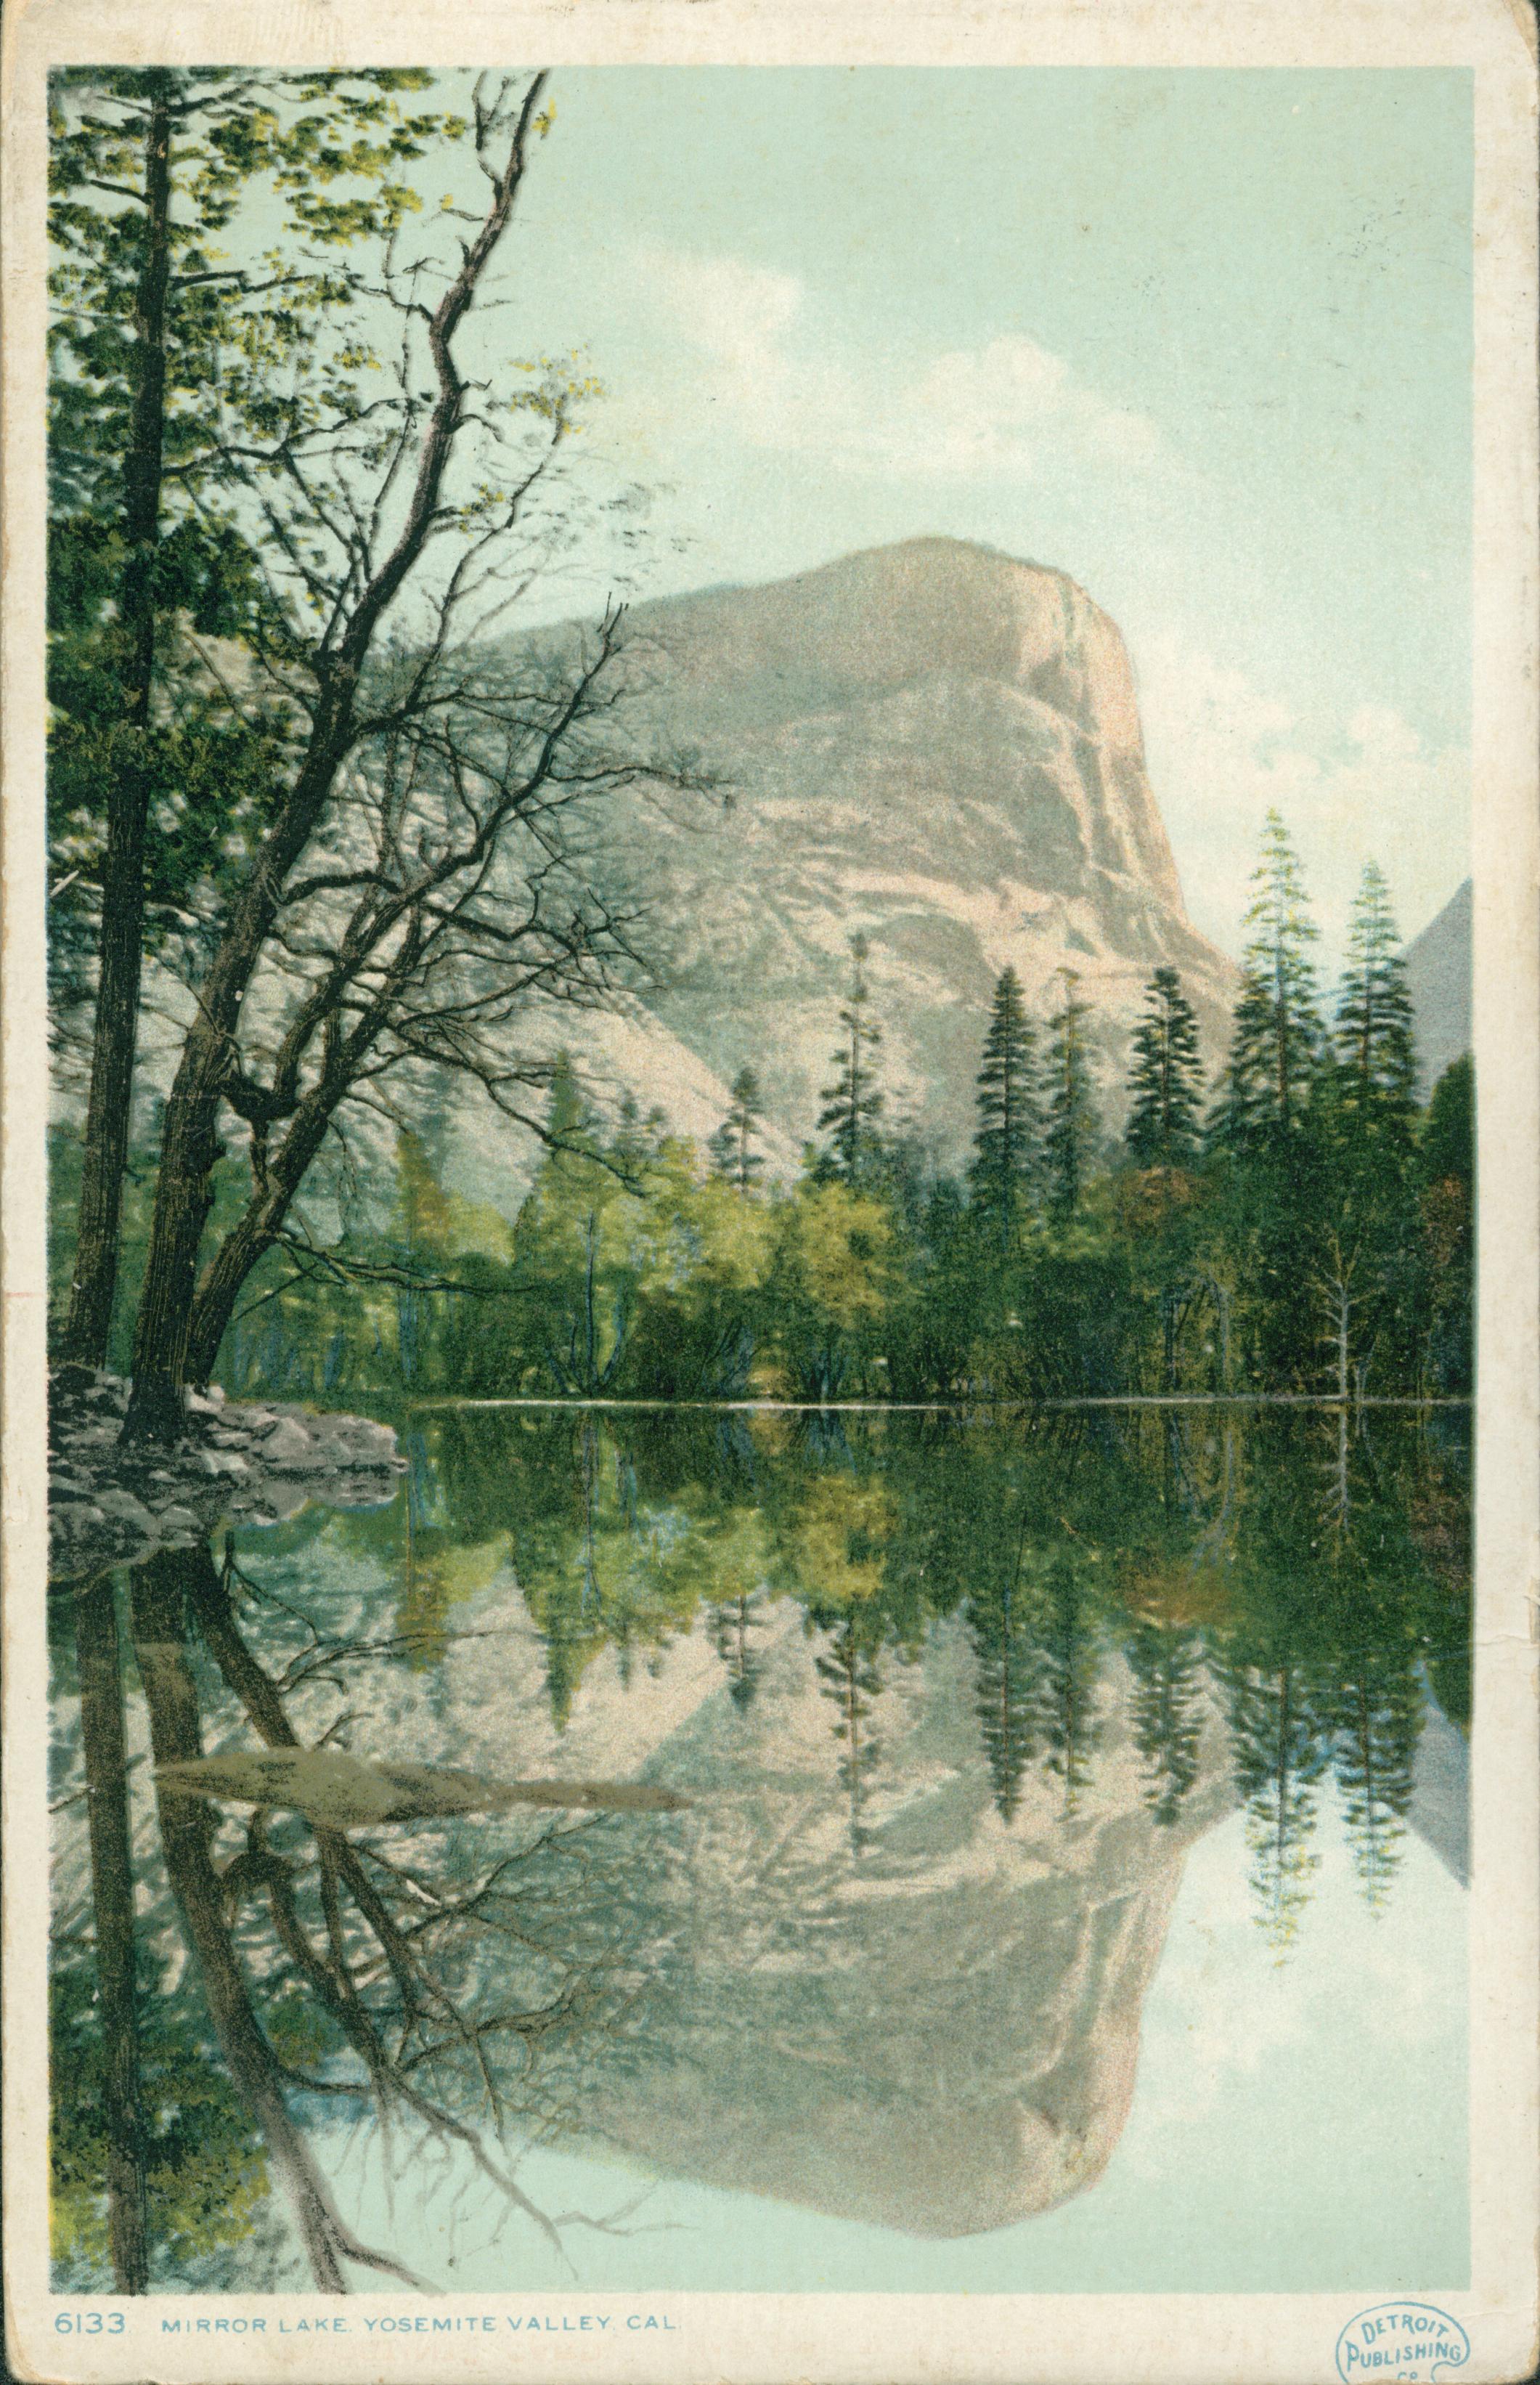 Shows Mirror Lake with a rock formation in the background